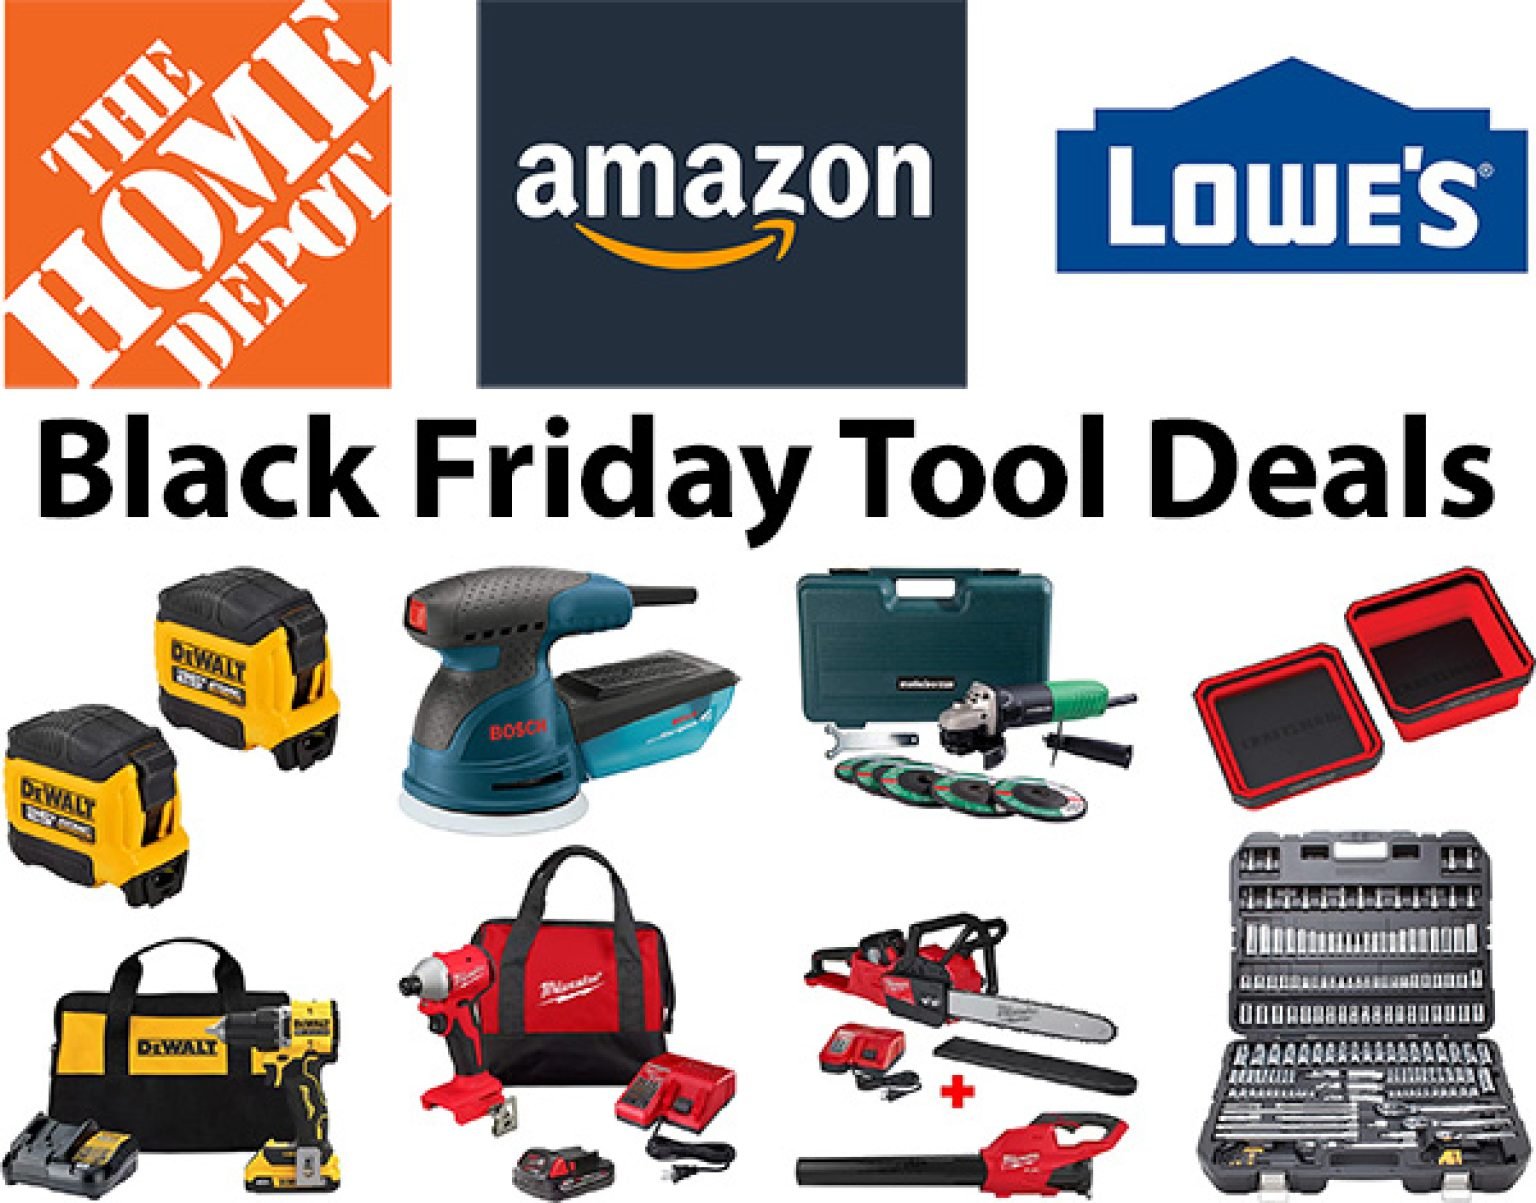 42 Best Black Friday Deals at Home Depot, Amazon, and Lowe’s ToolKit